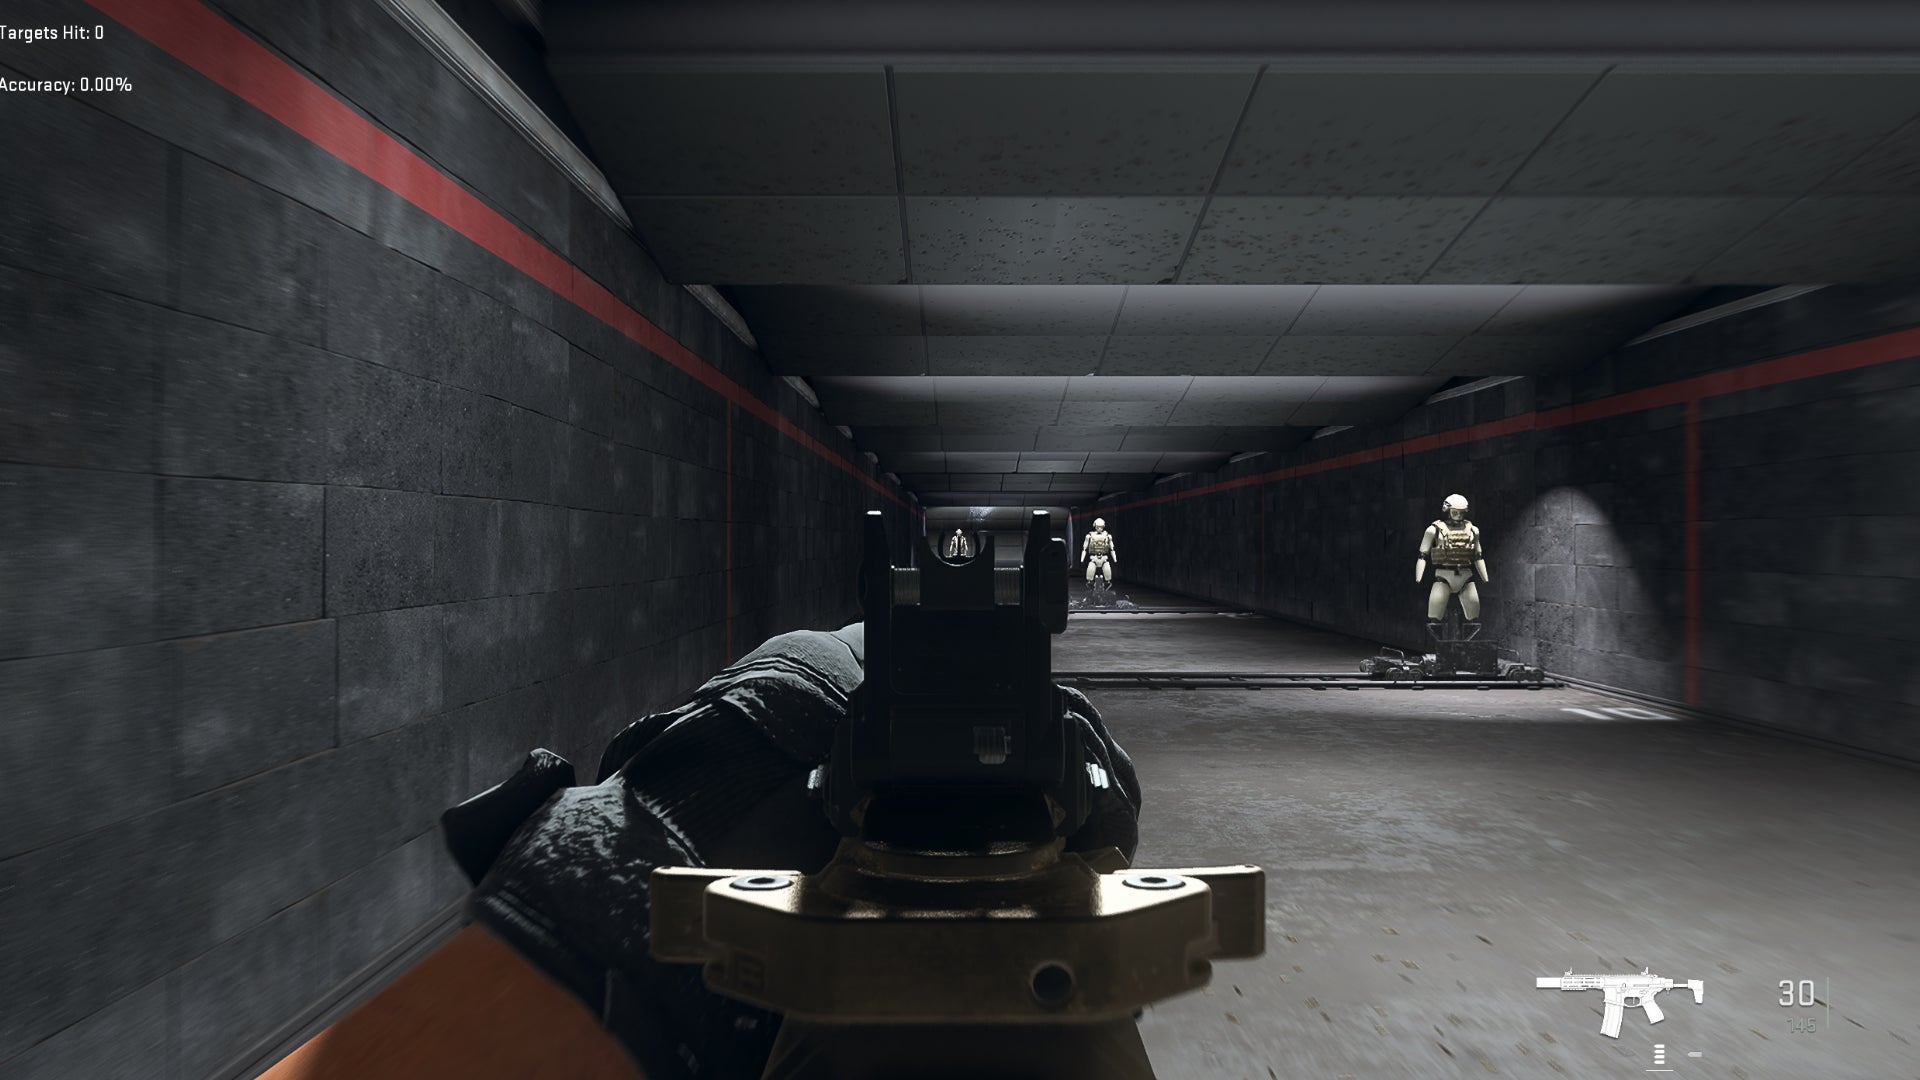 The player in Warzone 2.0 aims at a training dummy with the BAS-P ironsights.